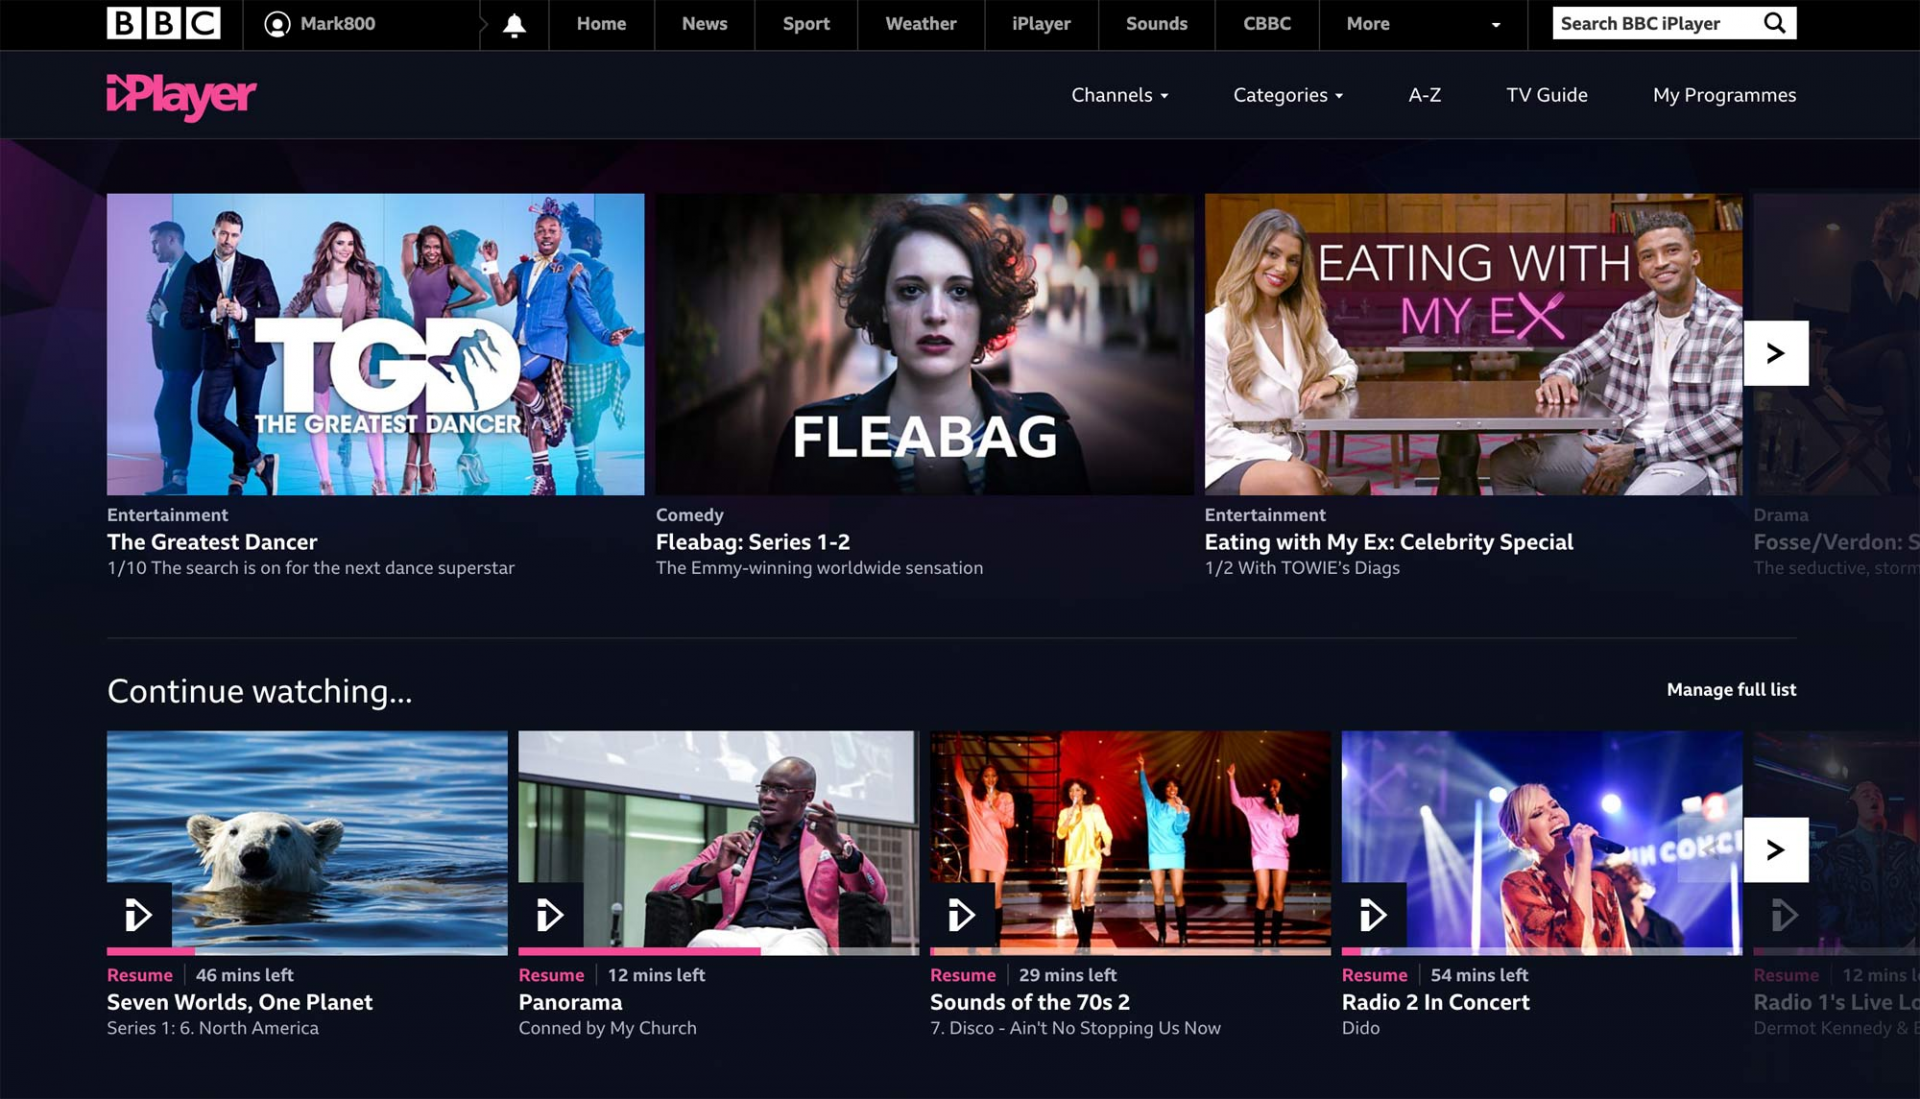 Watch BBC iPlayer For FREE, Live Broadcast in Myanmar